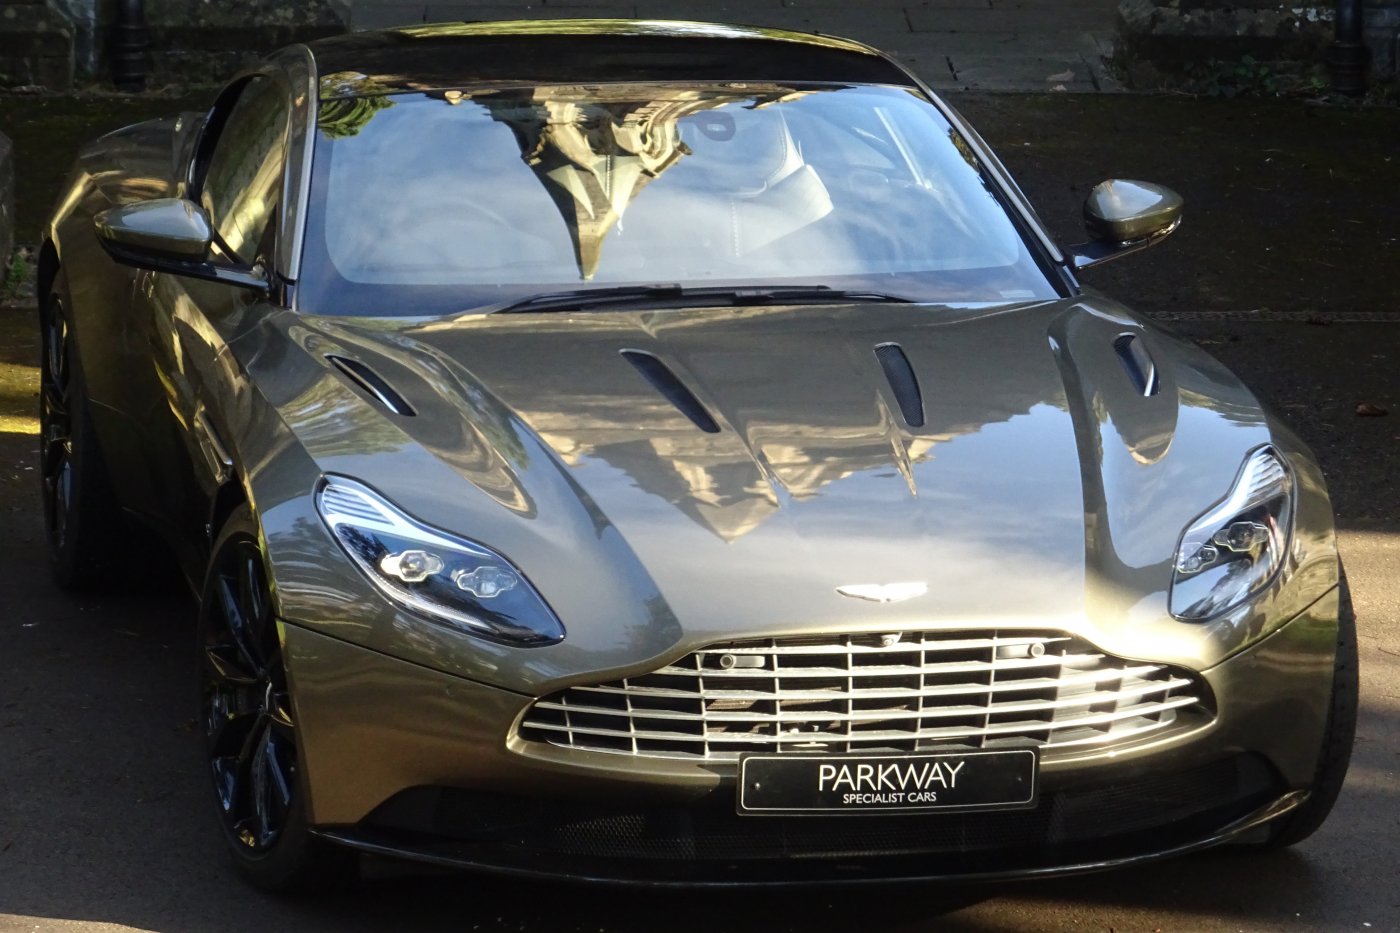 http://www.parkwayspecialistcars.co.uk/uploads/product/zoom_ASTON_MARTIN_DB11_V12_COUPE_2DR_AUTO.jpg